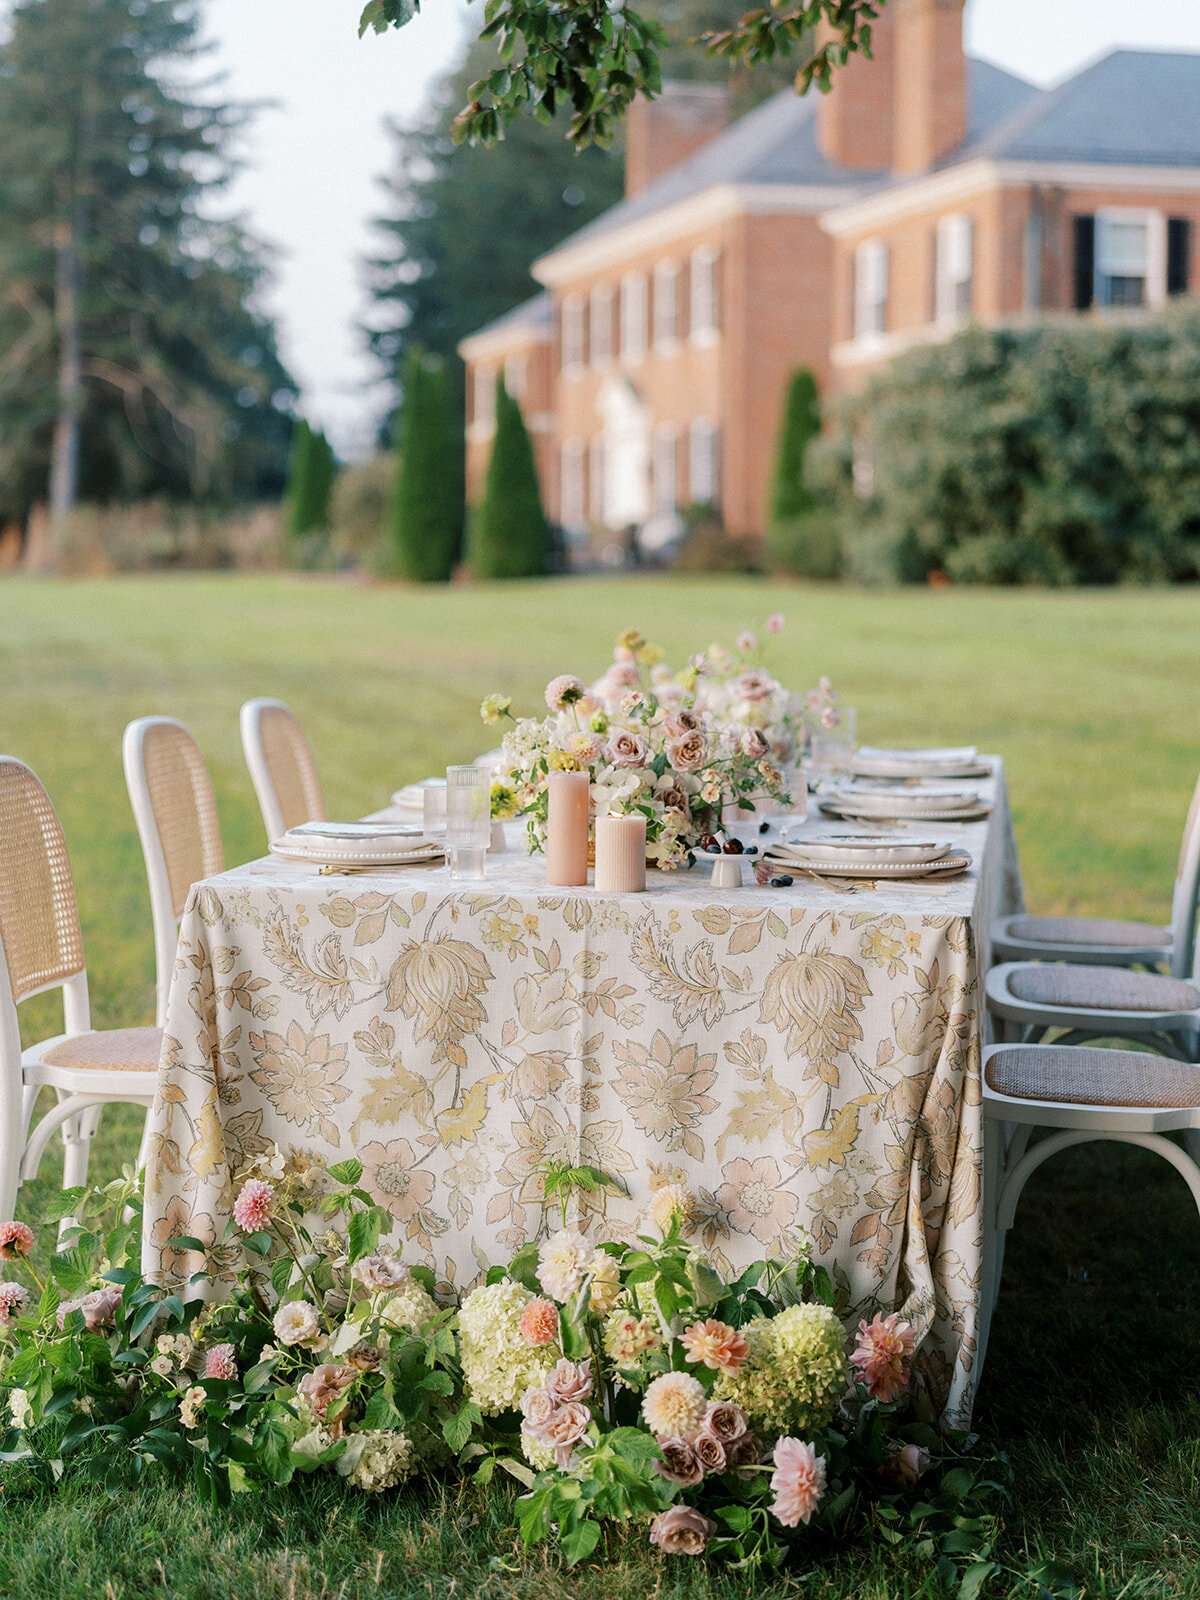 Long table overlooking Harford Hills mansion with ground arrangement at the end of the table including green hydrangea, mauve garden roses, peach and orange dahlias, blush lisianthus and organic greenery.